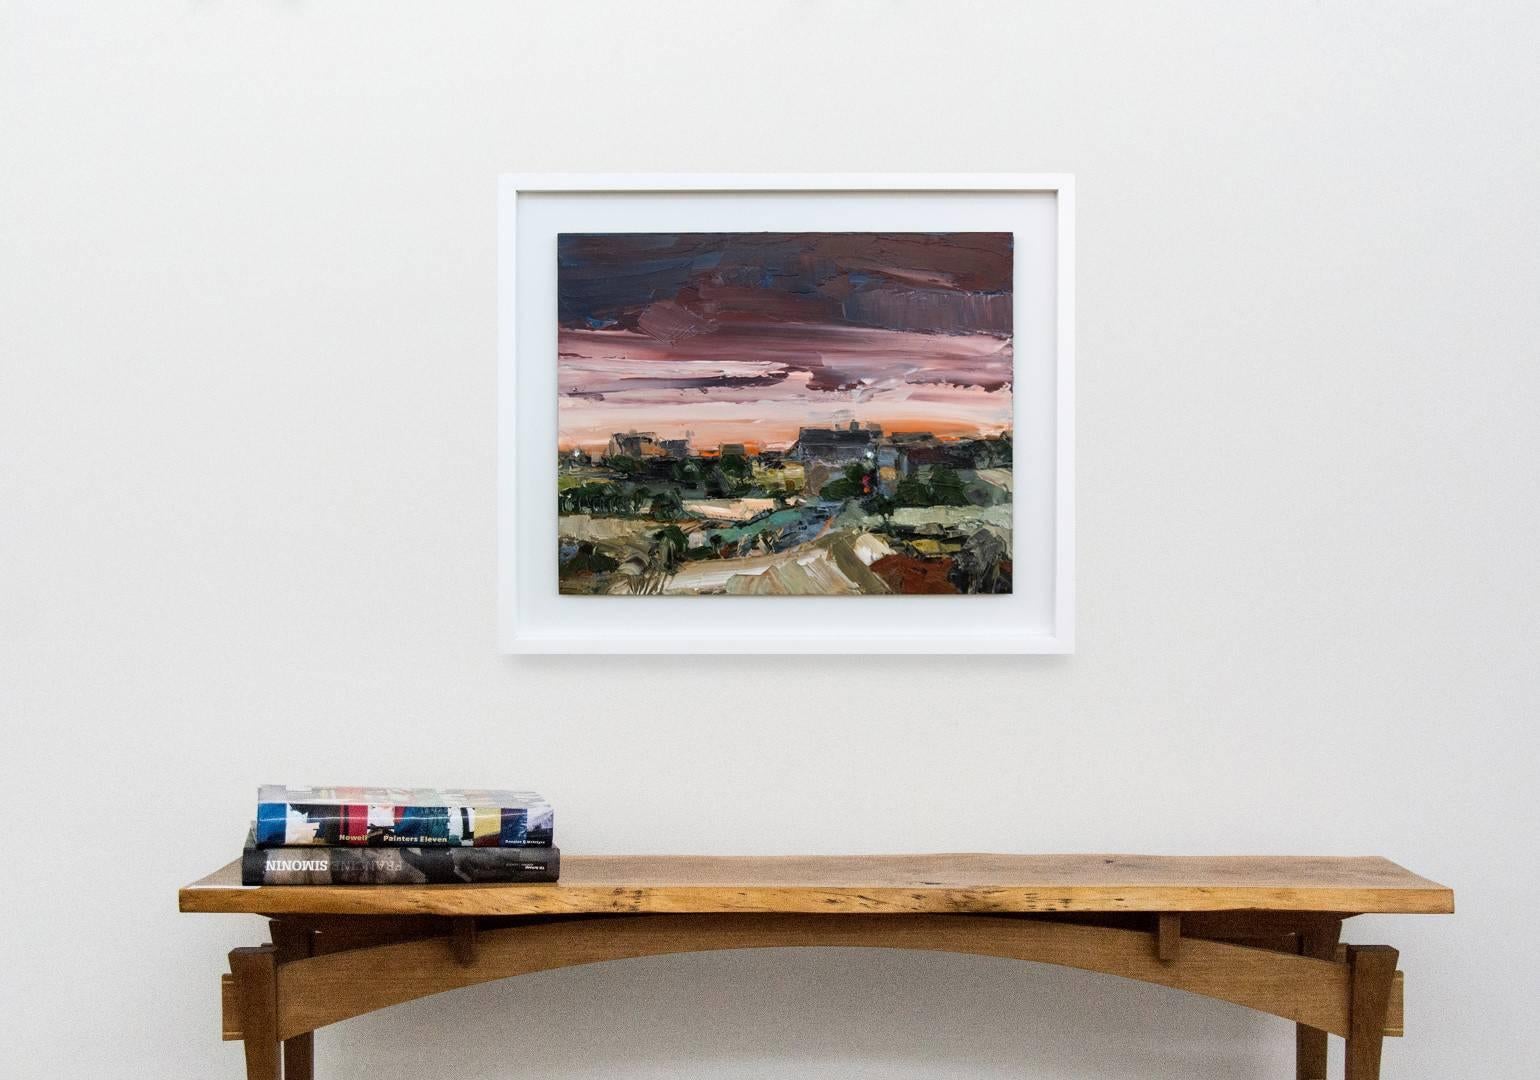 A fiery orange skyline rises to meet thick magenta clouds above a row of industrial buildings in this moody oil on canvas.  This gestural landscape reflects Andrew's 